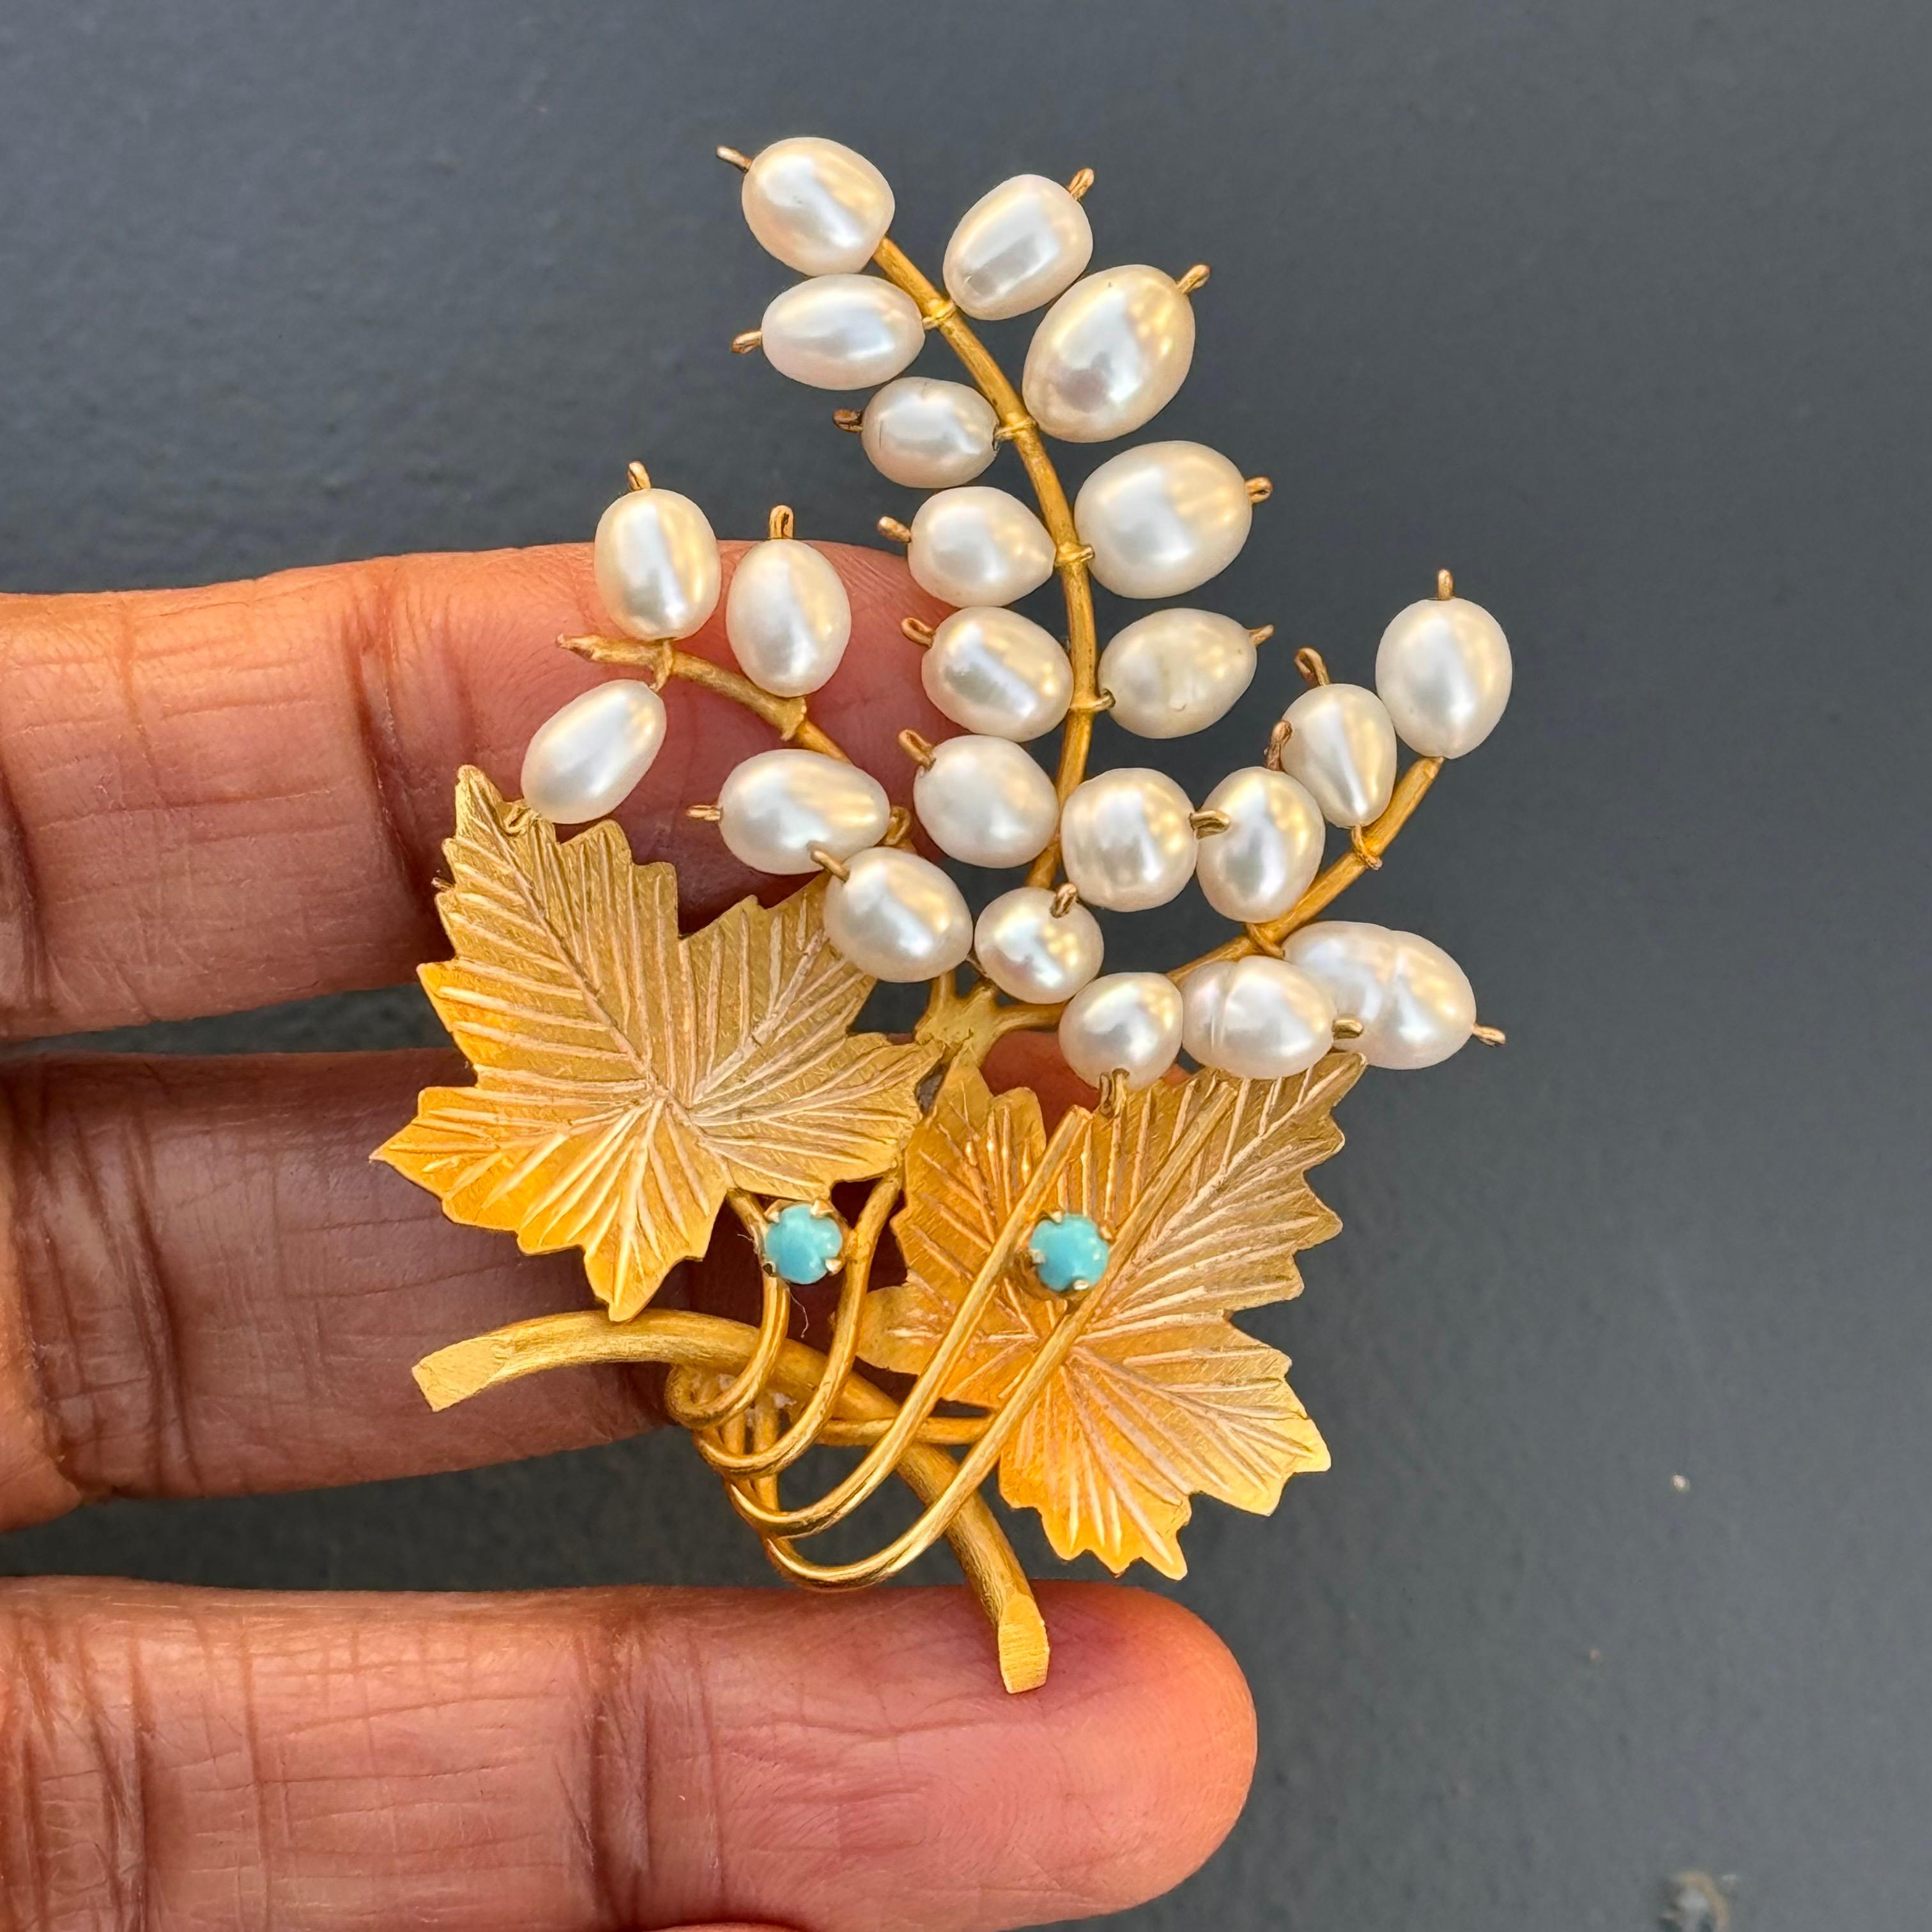  750 18K solid Yellow Gold Cultured Pearl Cluster  Brooch Pin For Sale 2